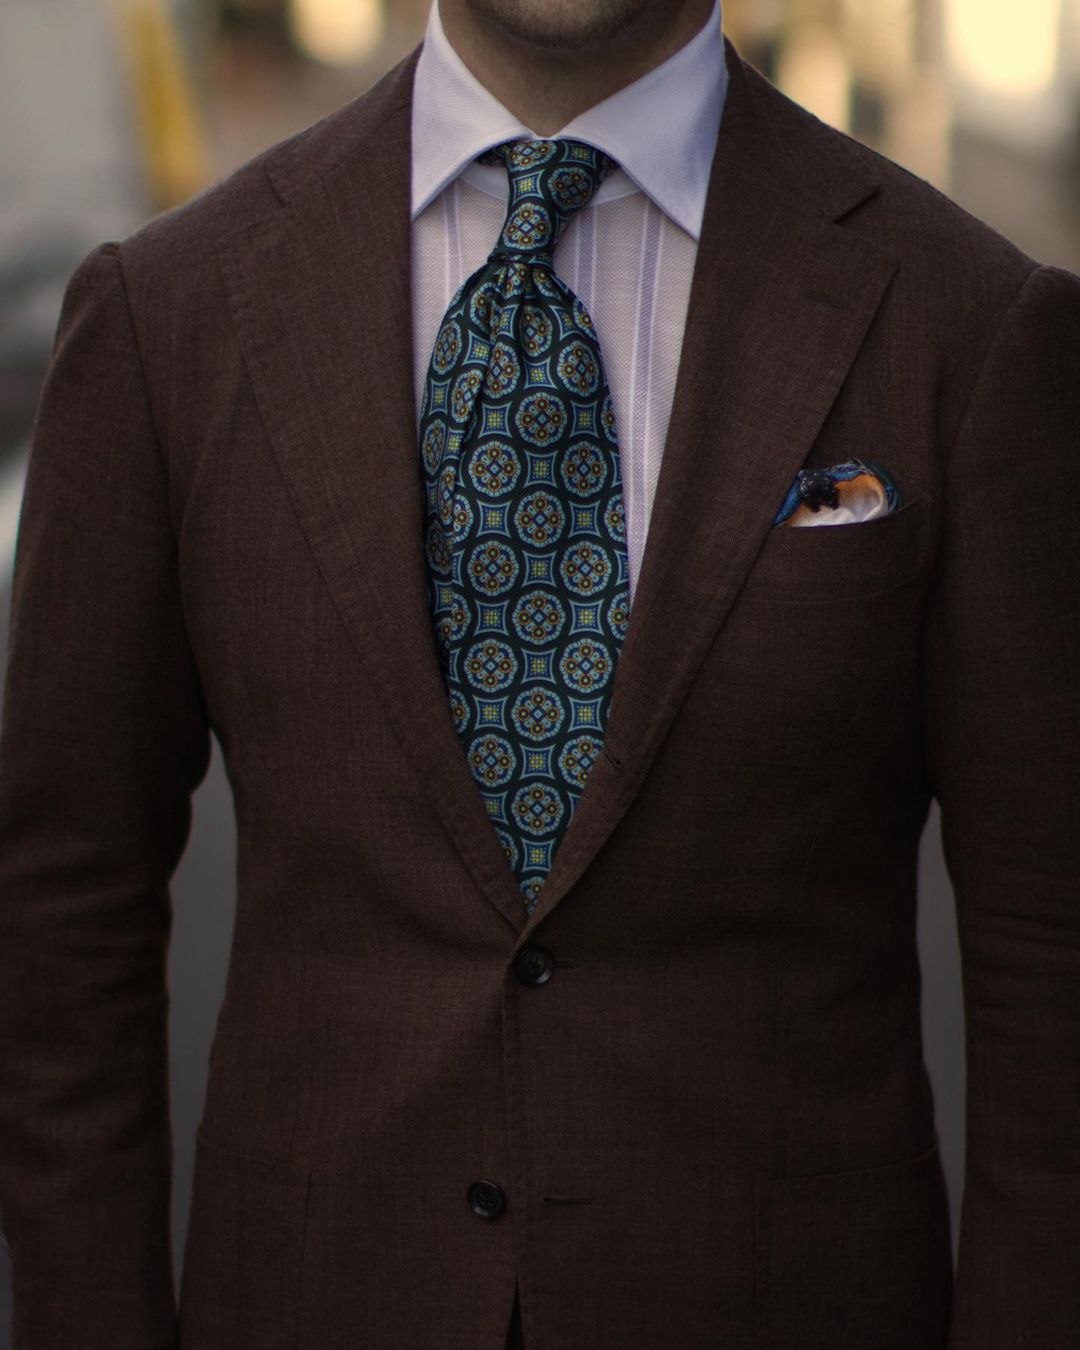 Shibumi tie  & Pocket Square combined with a suit